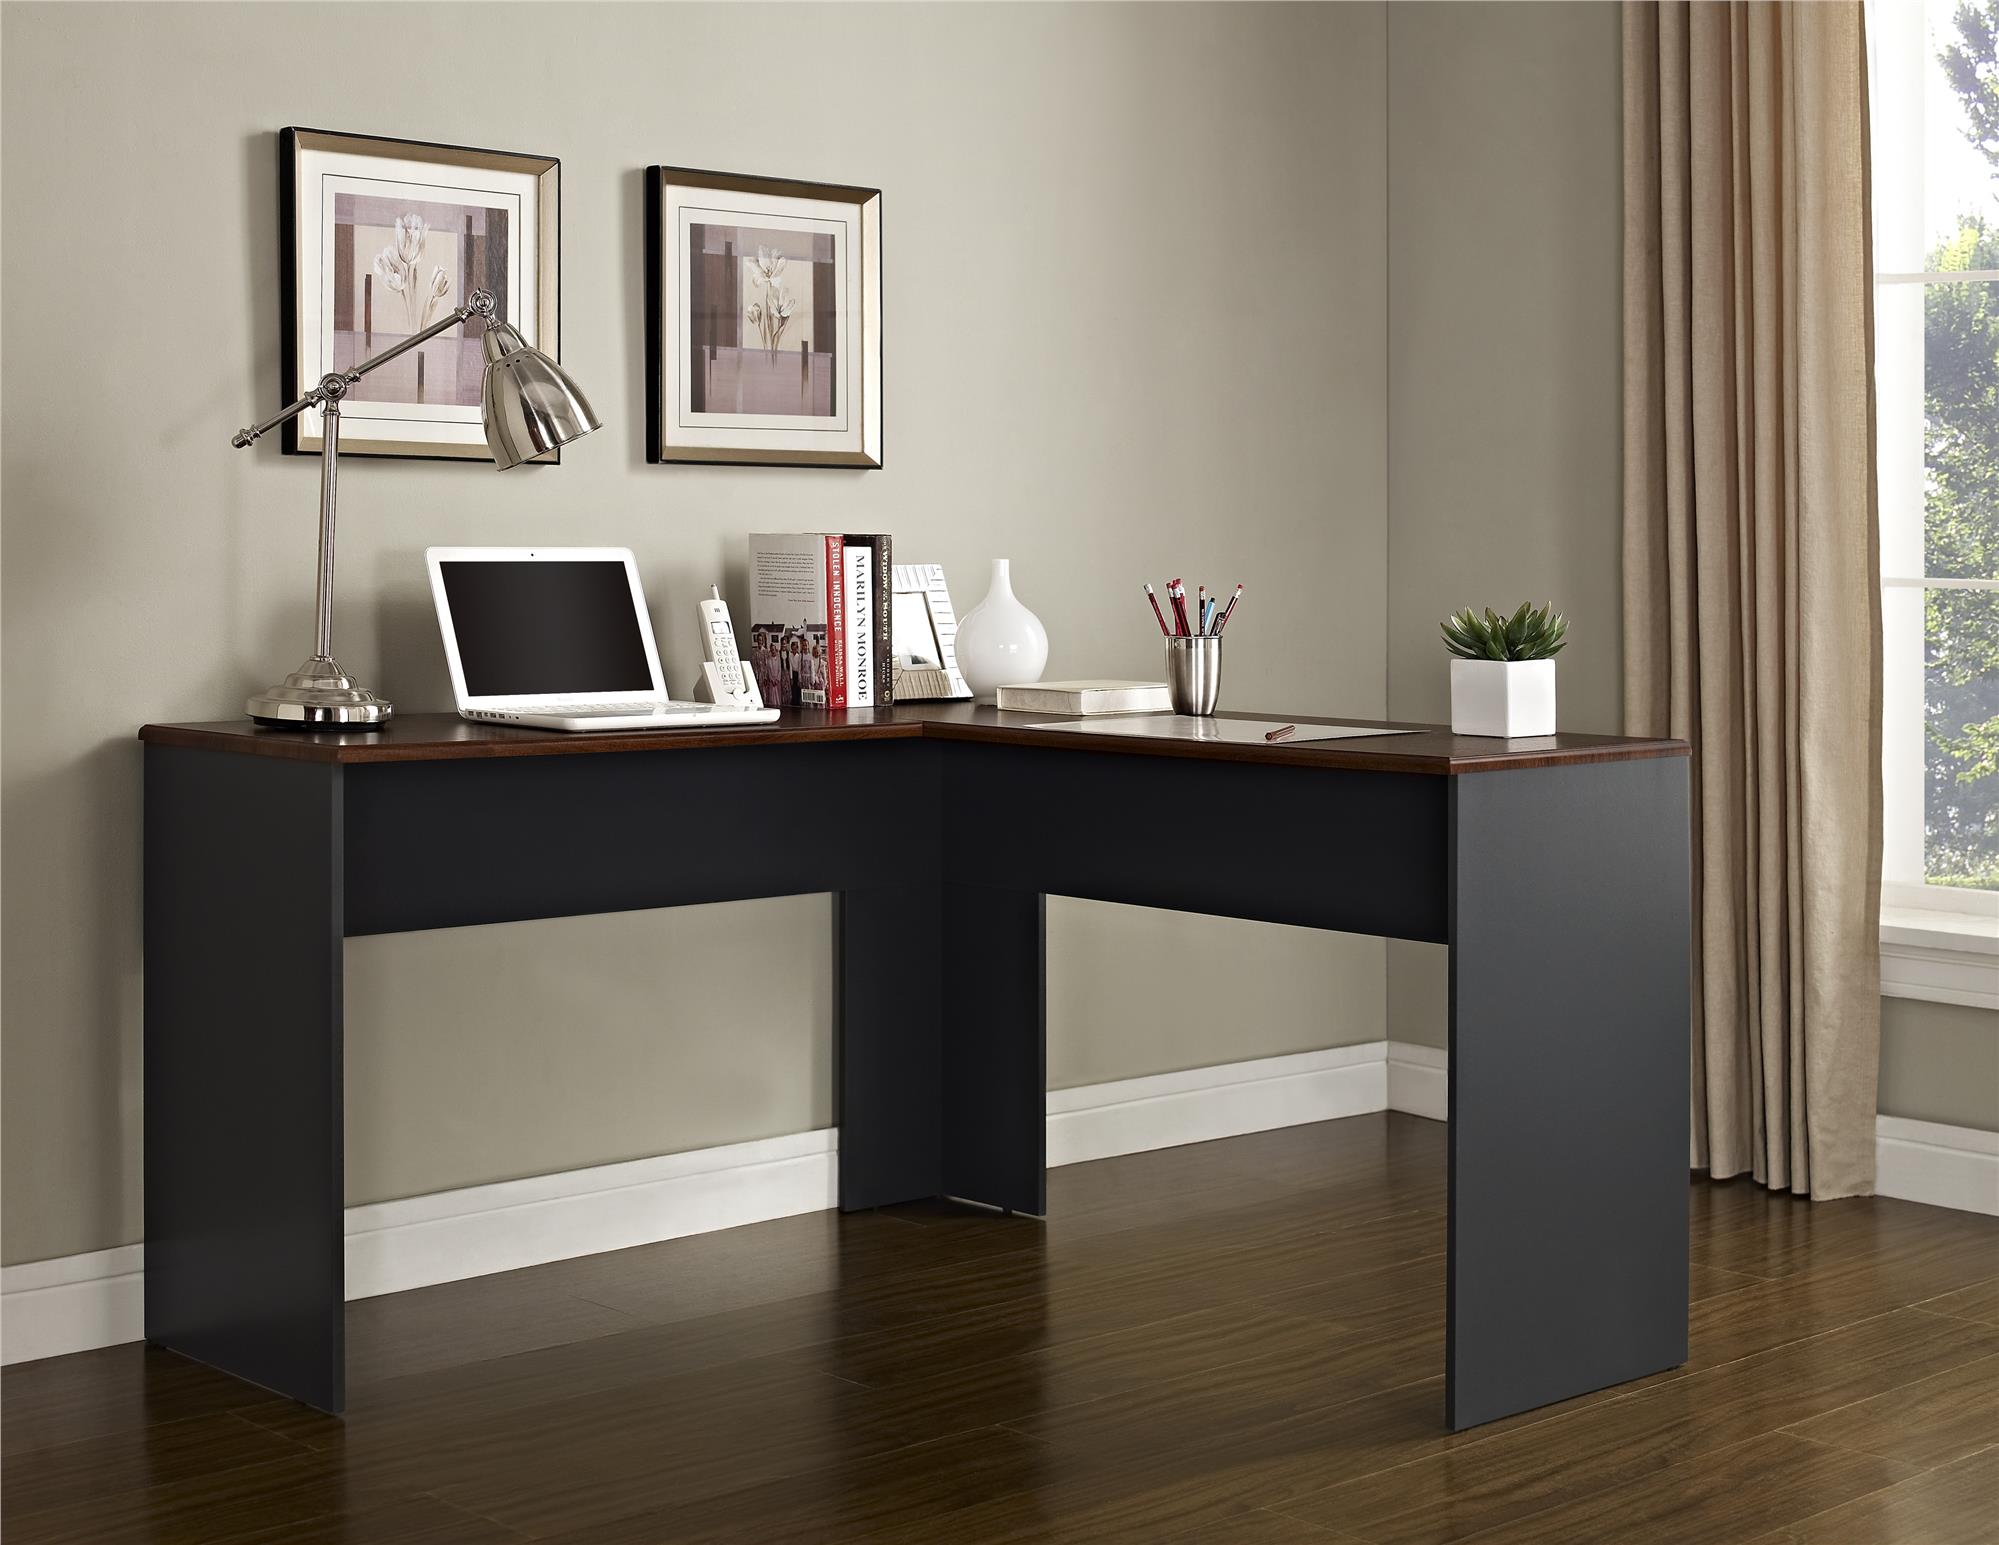 Ameriwood Home Duffield L Desk, Cherry - image 1 of 7